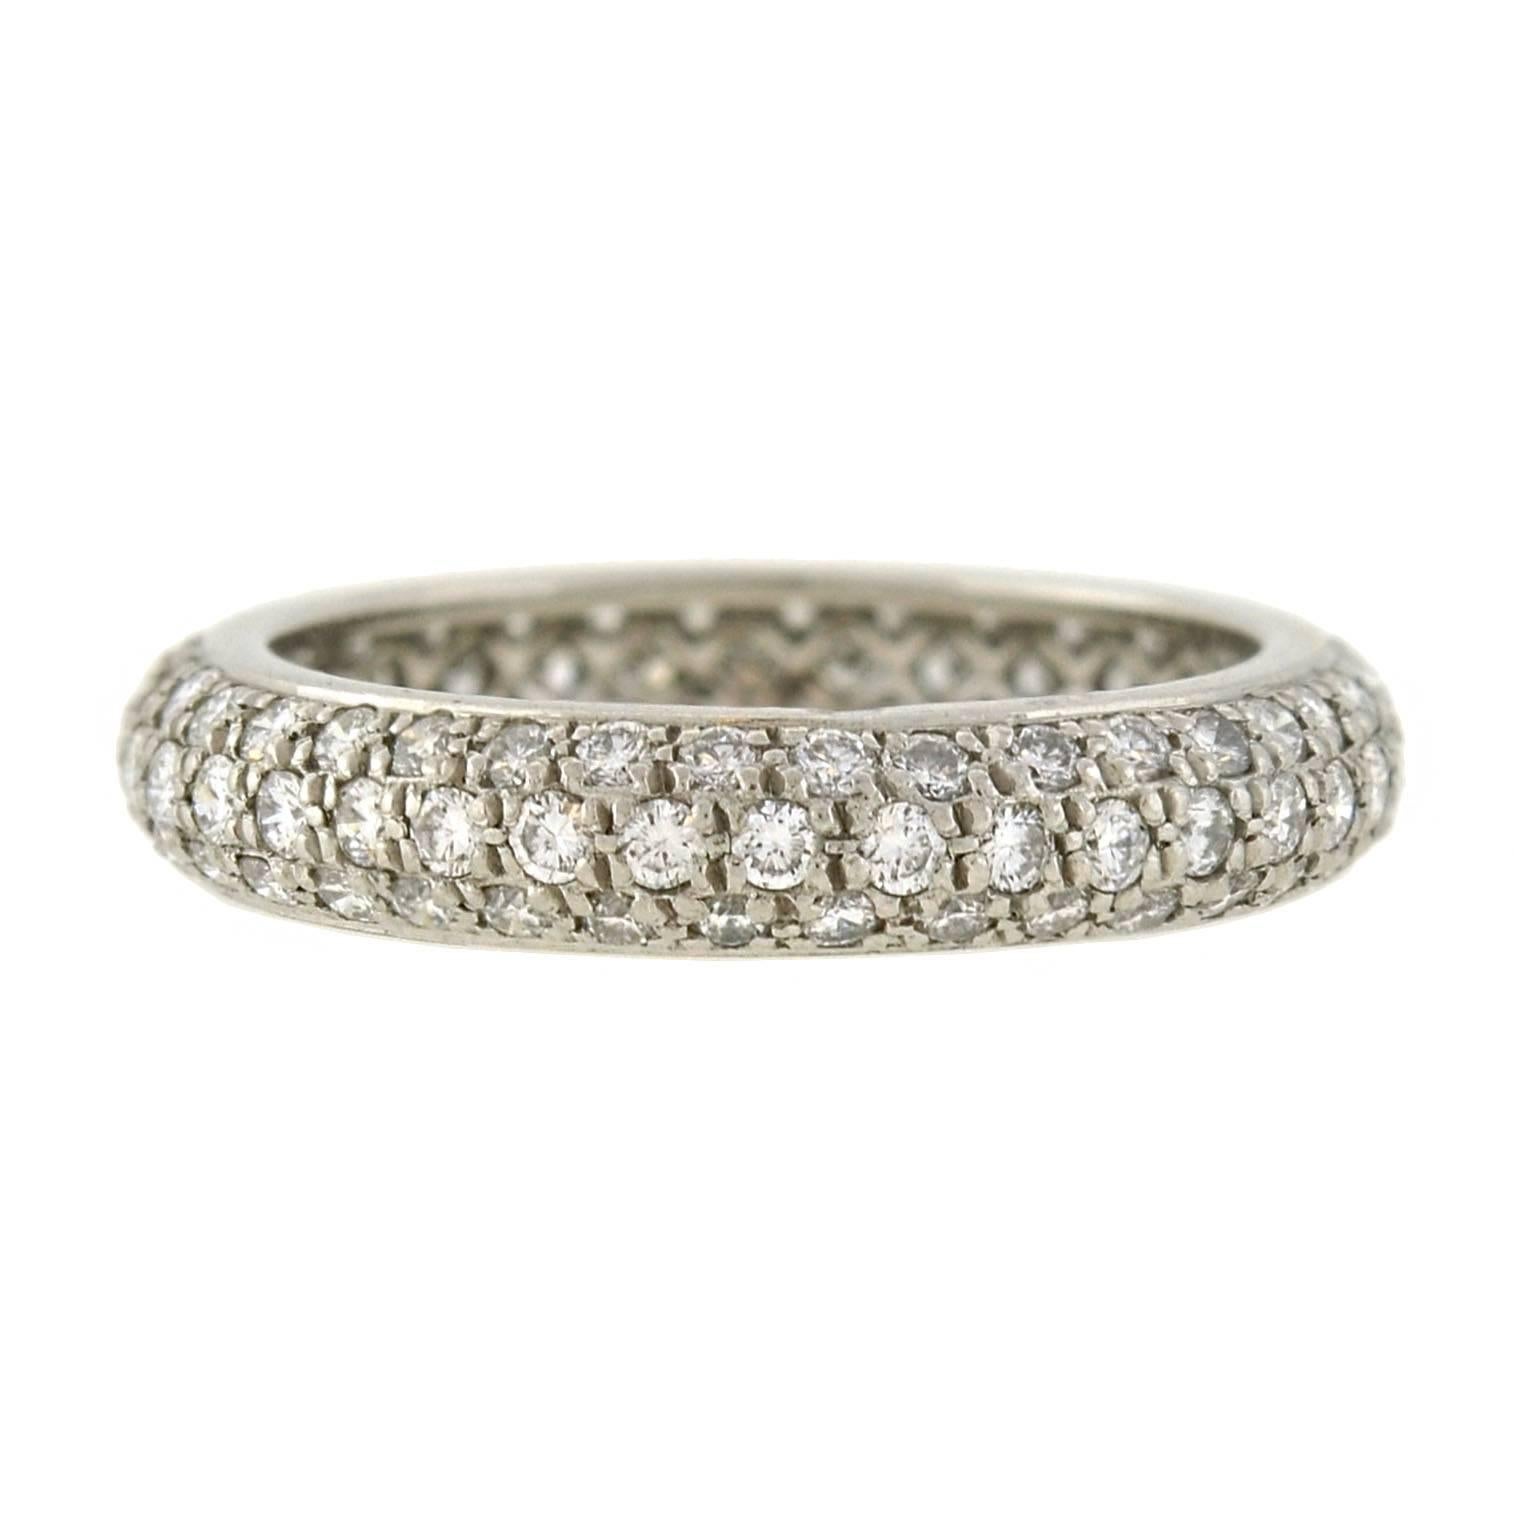 This stunning pavé diamond band is a signed estate piece by Cartier! Crafted in platinum, the ring boasts a spectacular diamond encrusted surface, which carries seamlessly all the way around the exterior. Collectively, the diamonds weigh